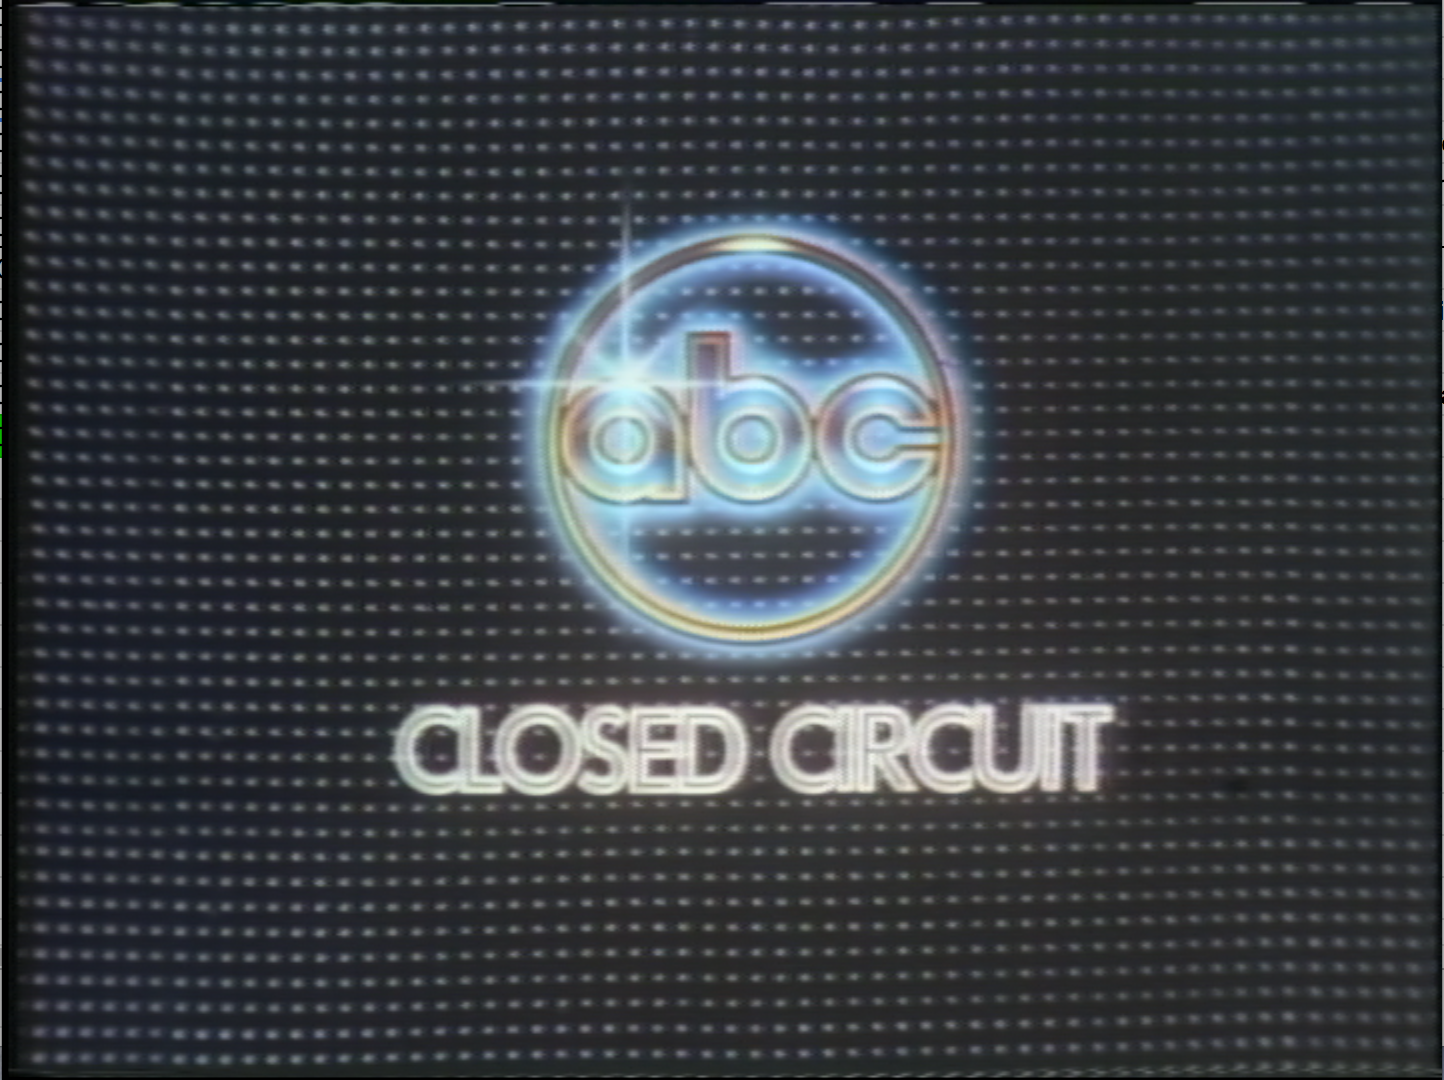 An example of a monitor image provided to WSJV by ABC. This image would have appeared on production studio monitors when they weren’t playing other broadcast components (live reporting, sound bytes to be cued up, etc.). Image shows ABC logo on black screen.